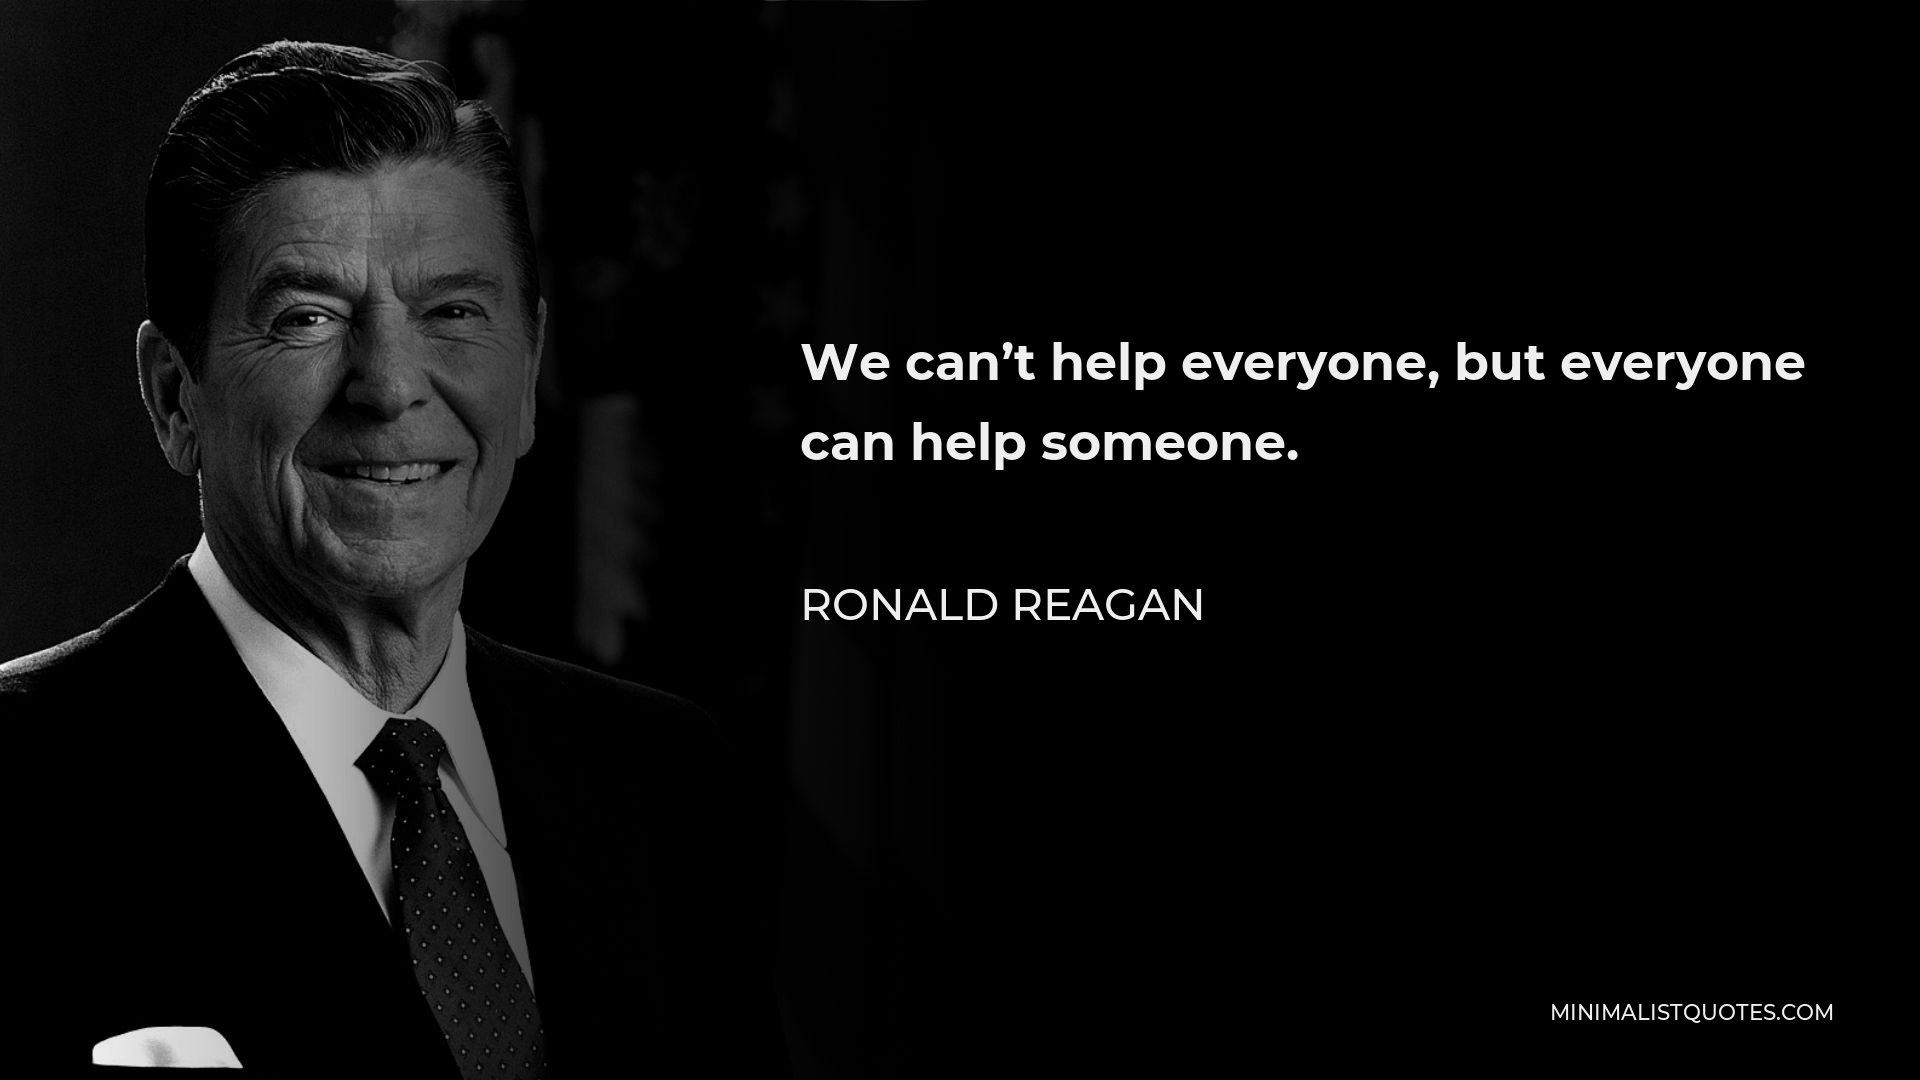 Ronald Reagan Quote - We can’t help everyone, but everyone can help someone.